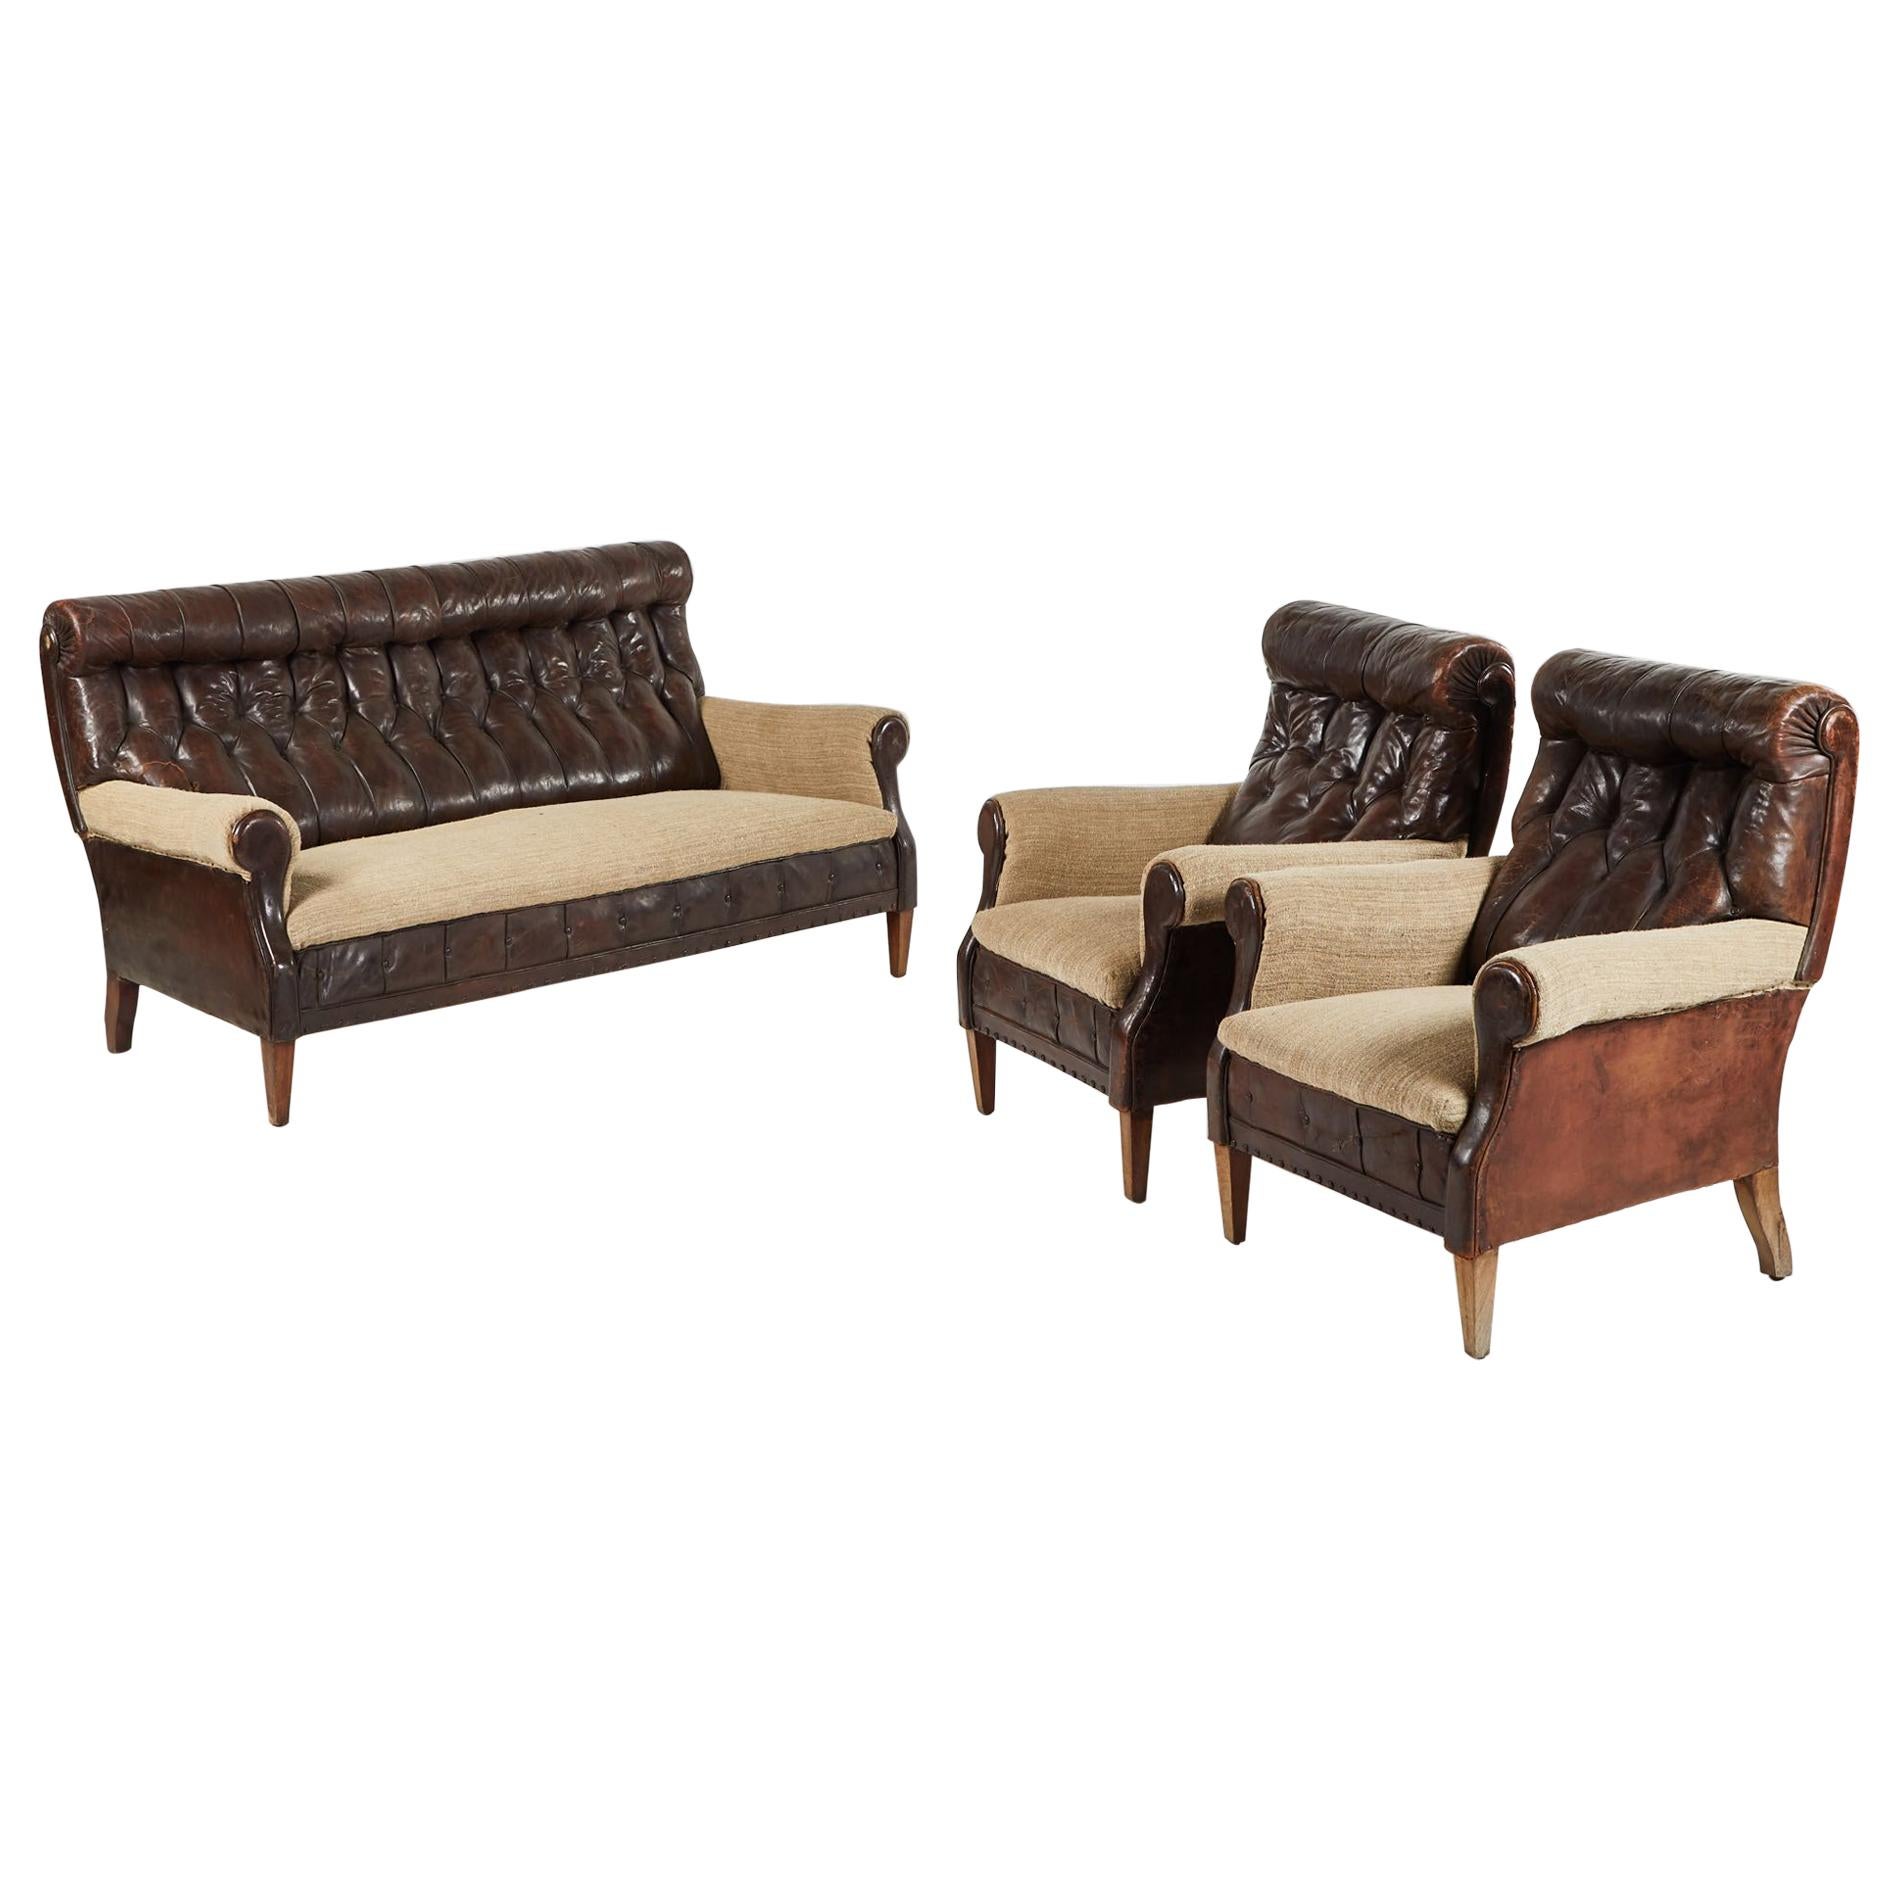 19th Century Leather and Hessian Sofa and Pair of Chairs Salon Set